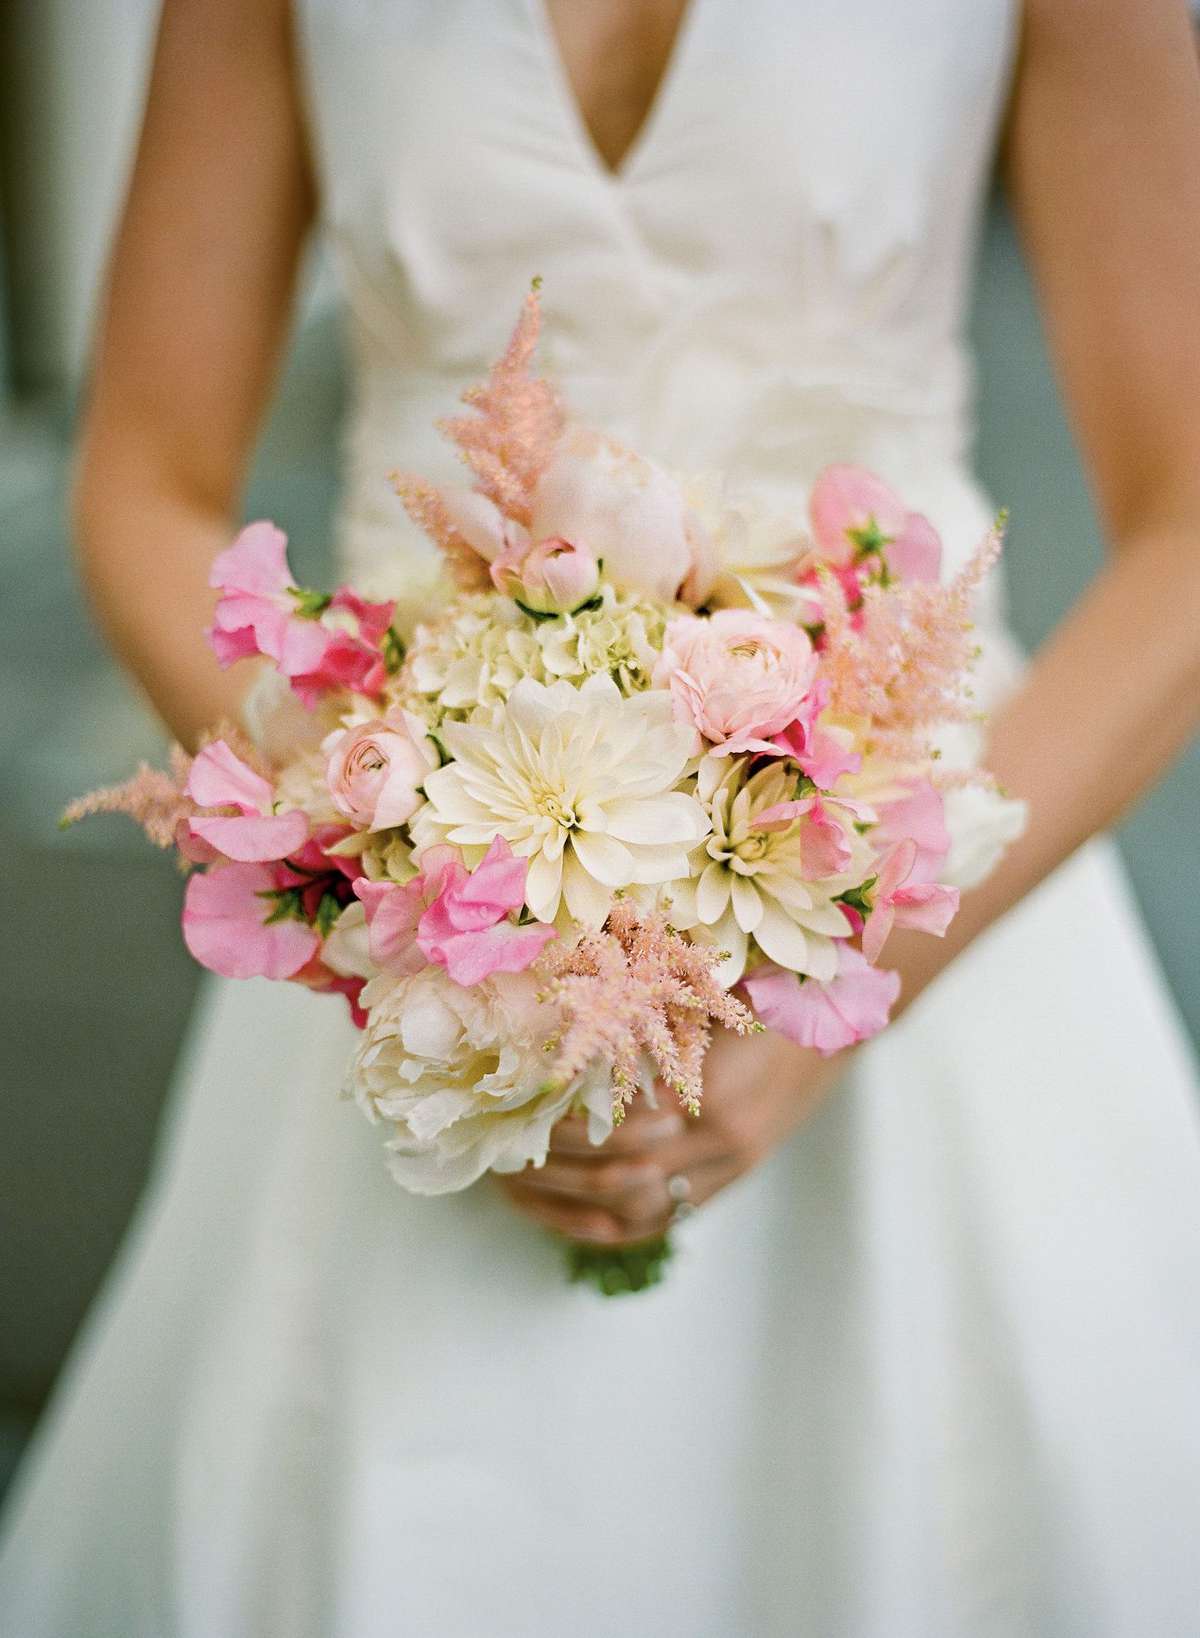 3. Plan the Perfectly Pink Bouquet